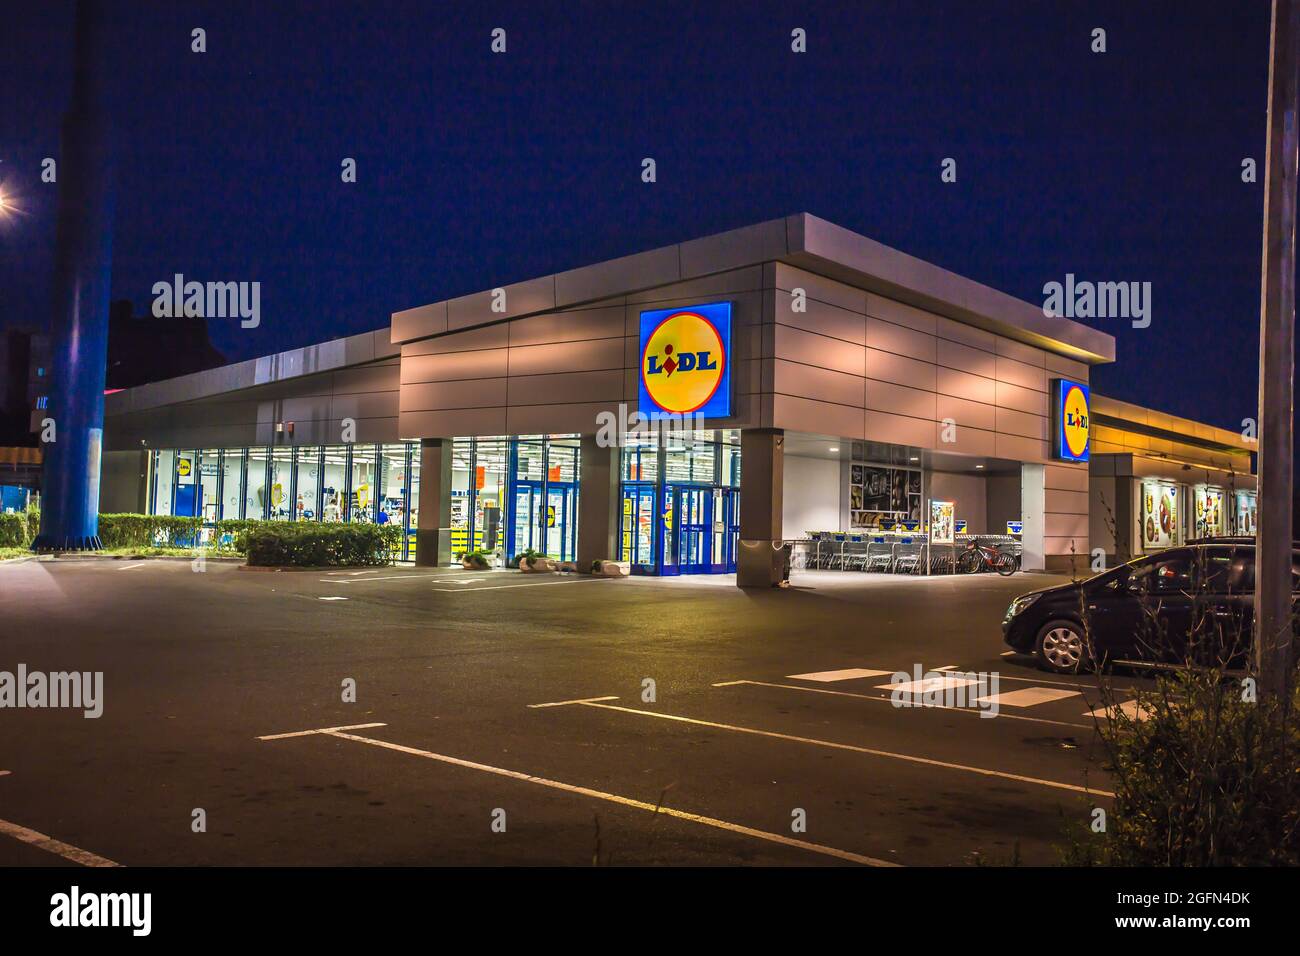 View of Lidl supermarket and logo in the night.Lidl Stiftung & Co. KG is a German global discount supermarket chain,operating in 26 European countries Stock Photo